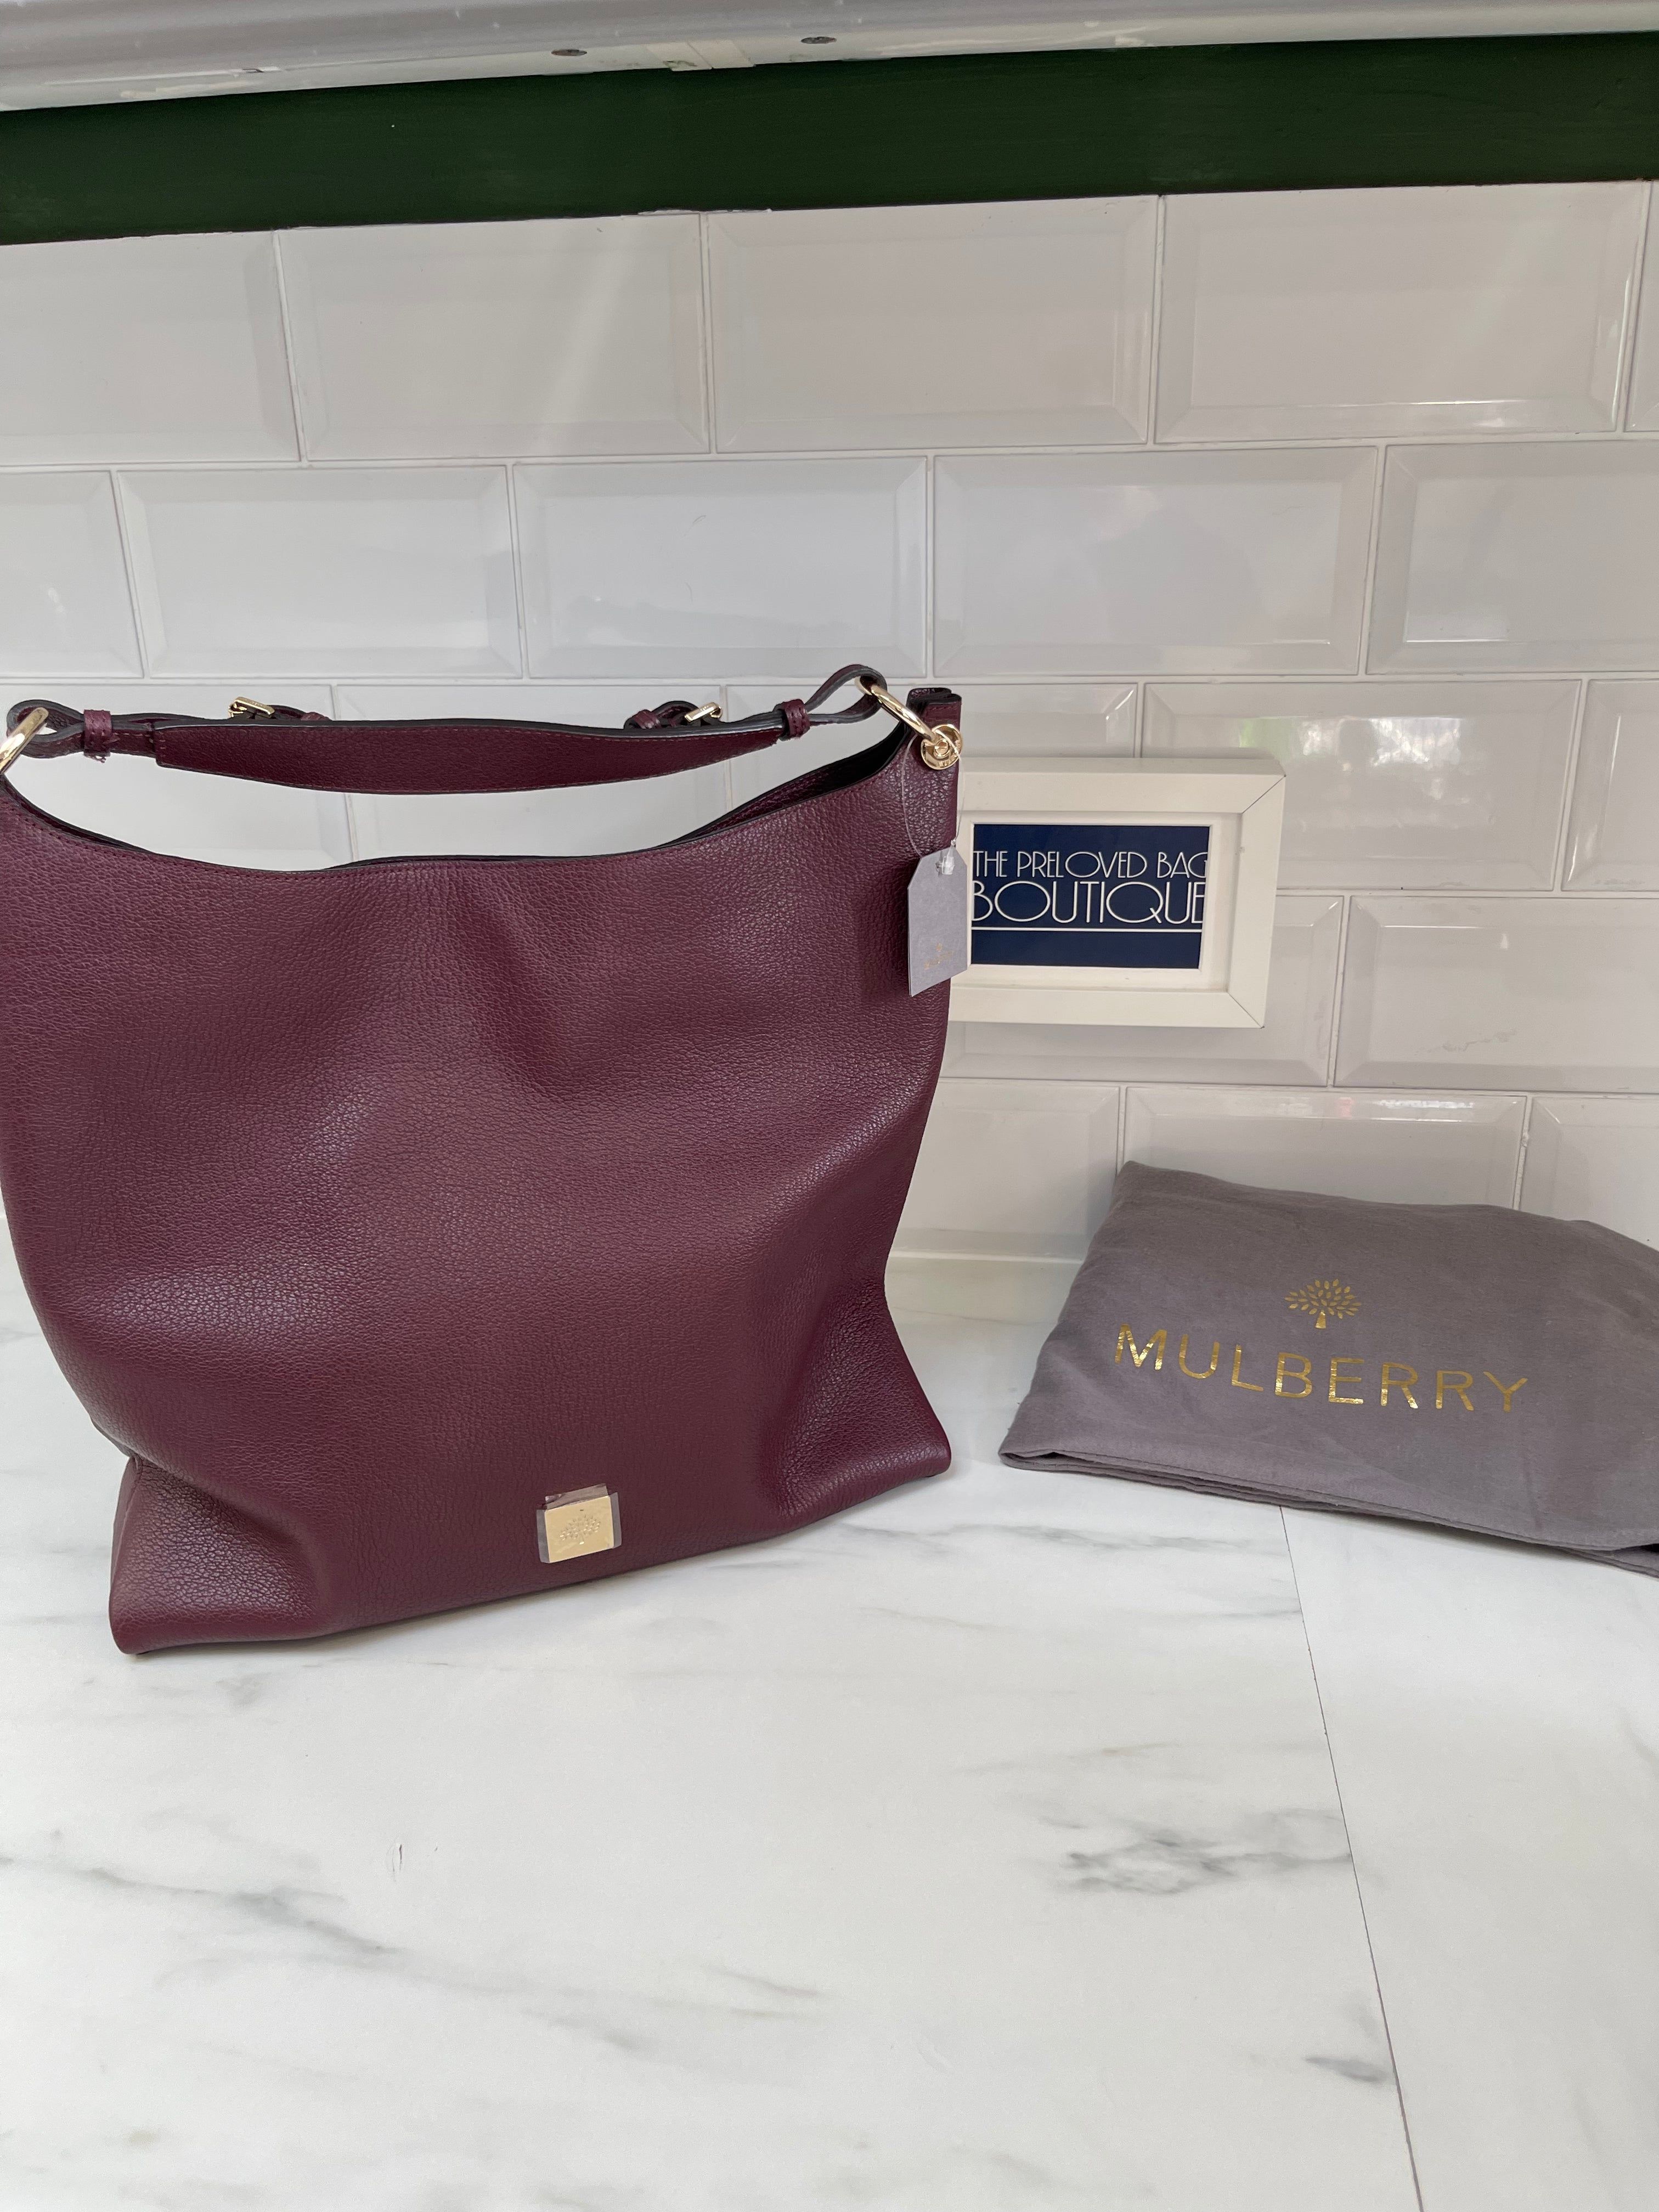 Mulberry Alexa Bag Review - YouTube